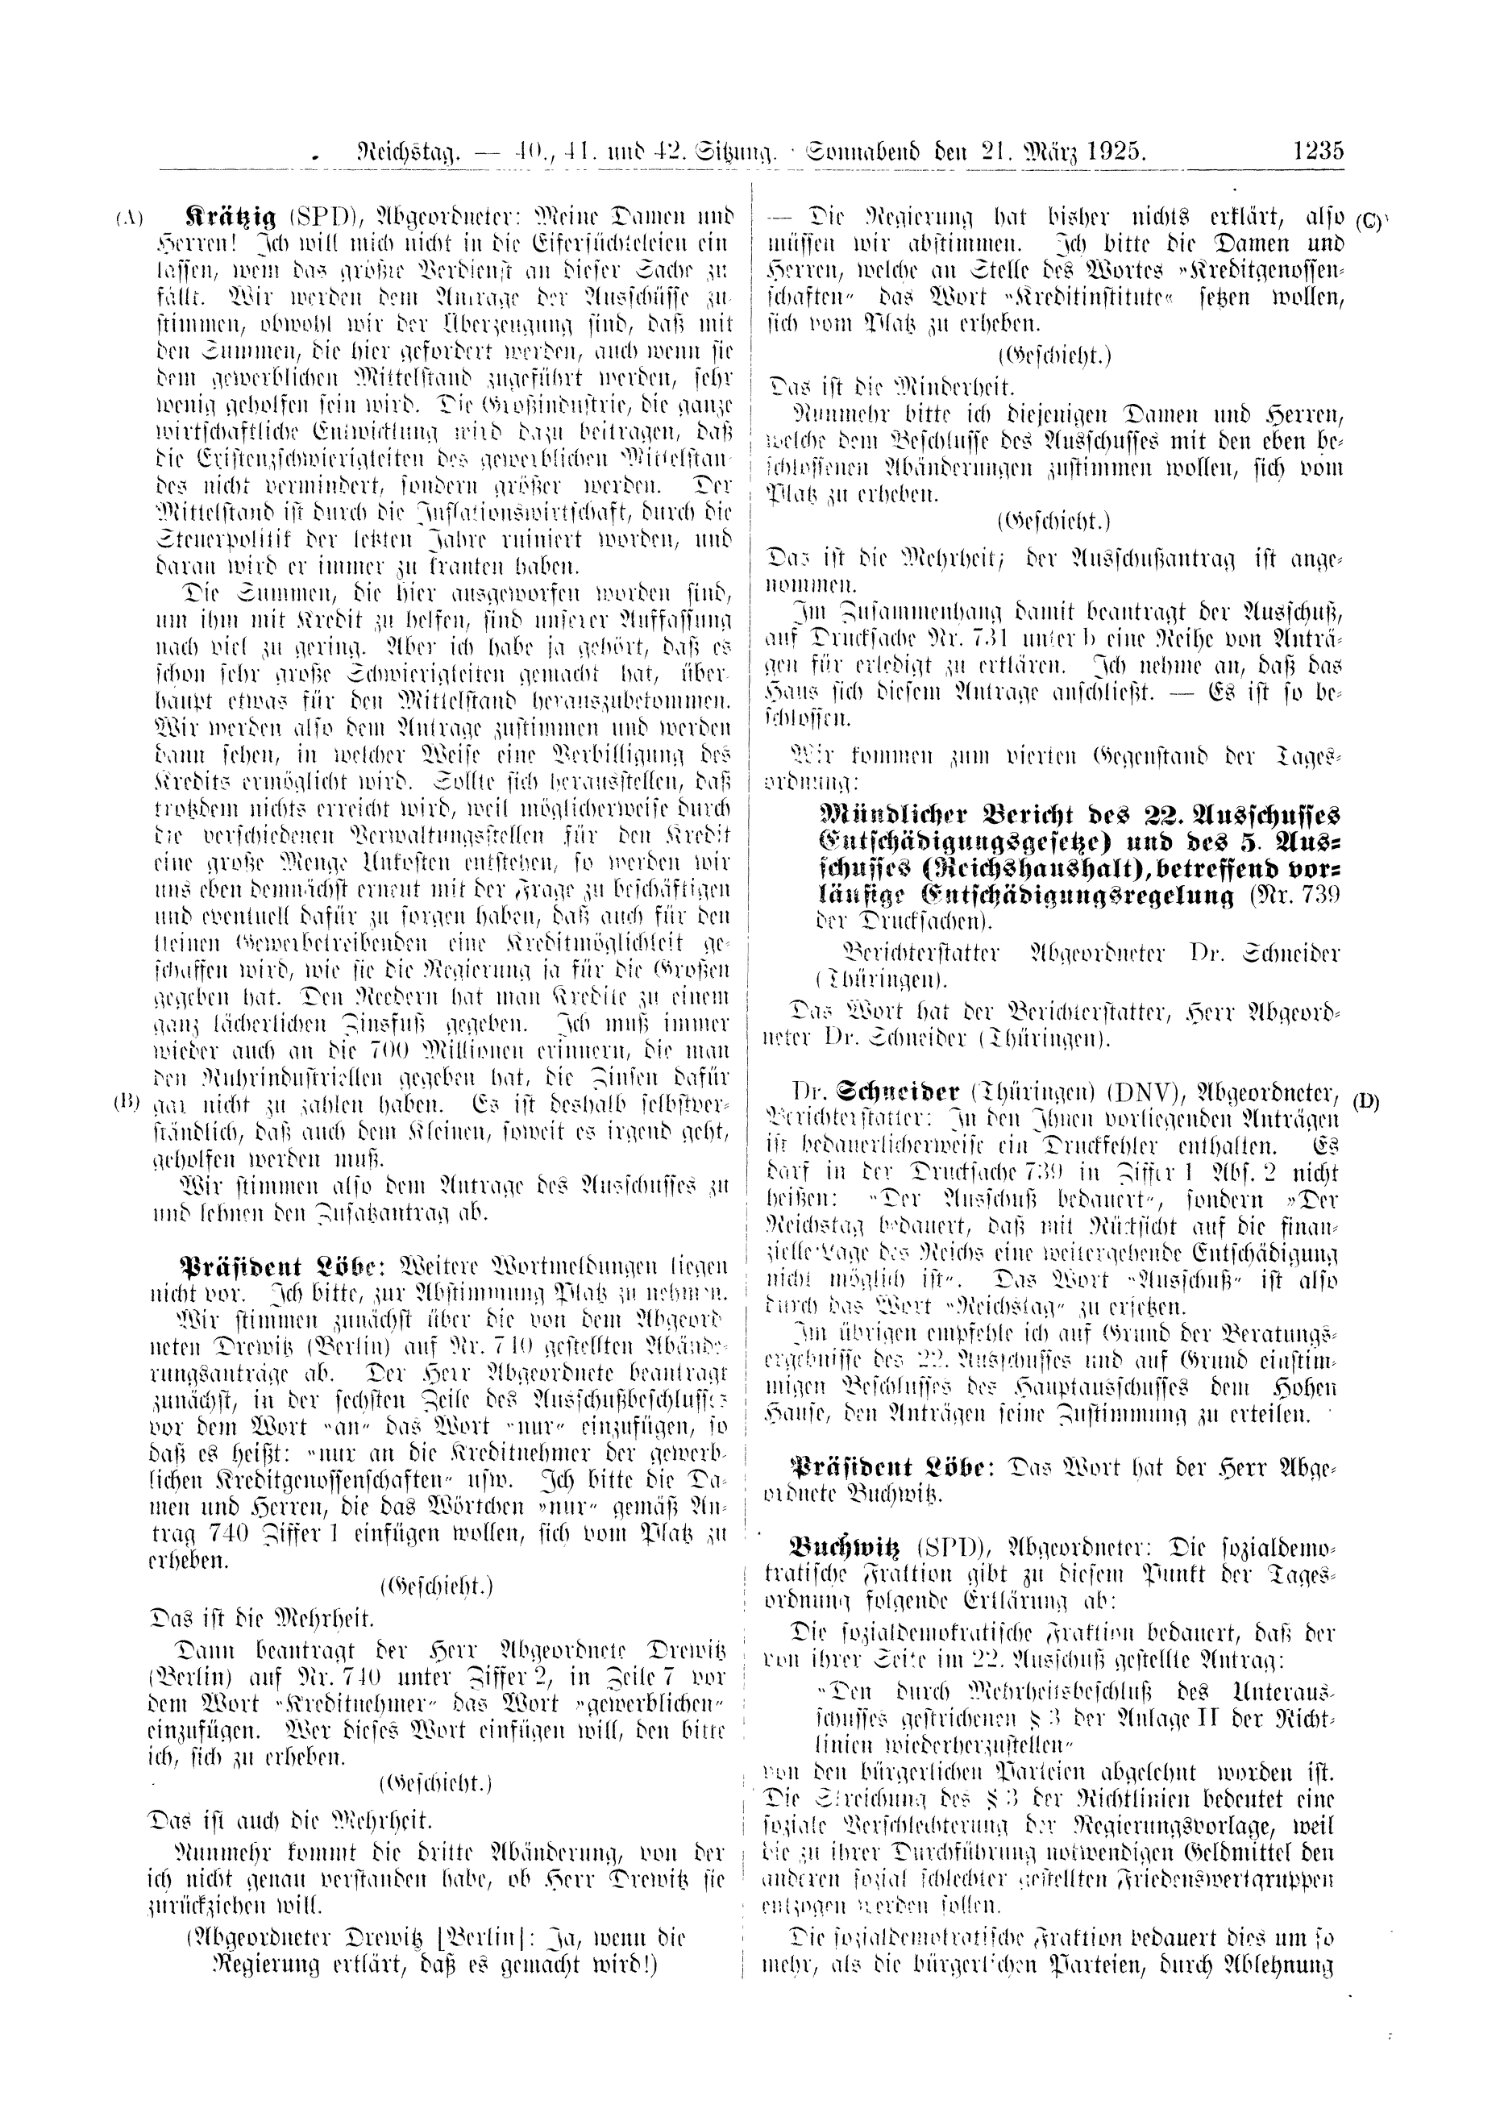 Scan of page 1235